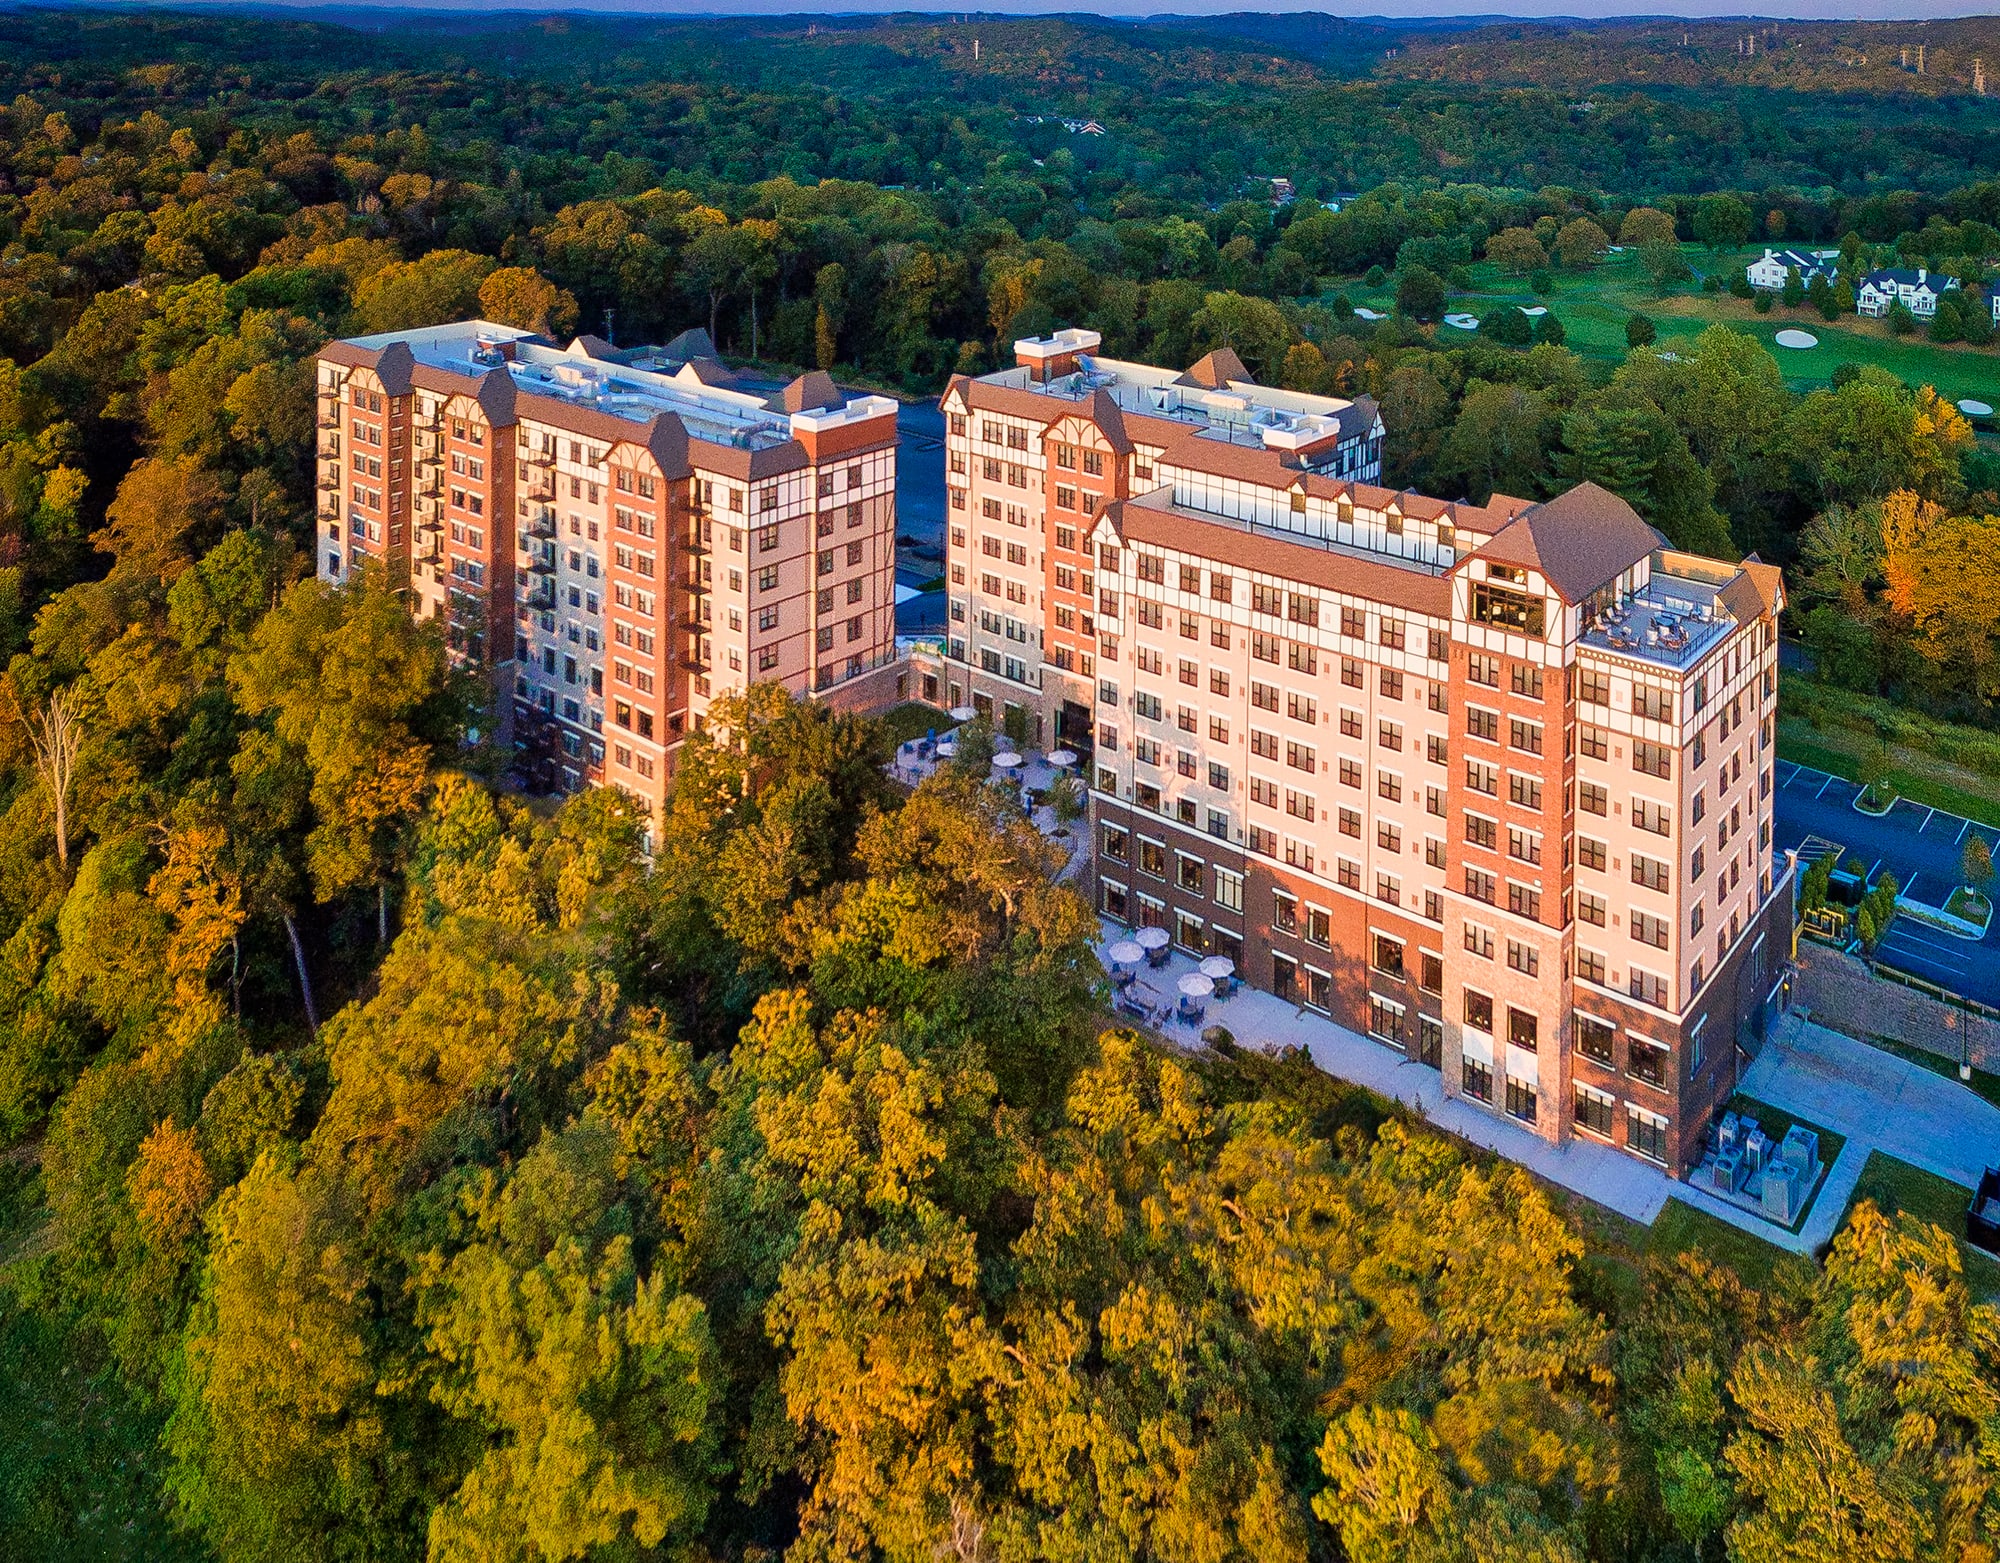 The Club at Briarcliff Manor aerial view of community